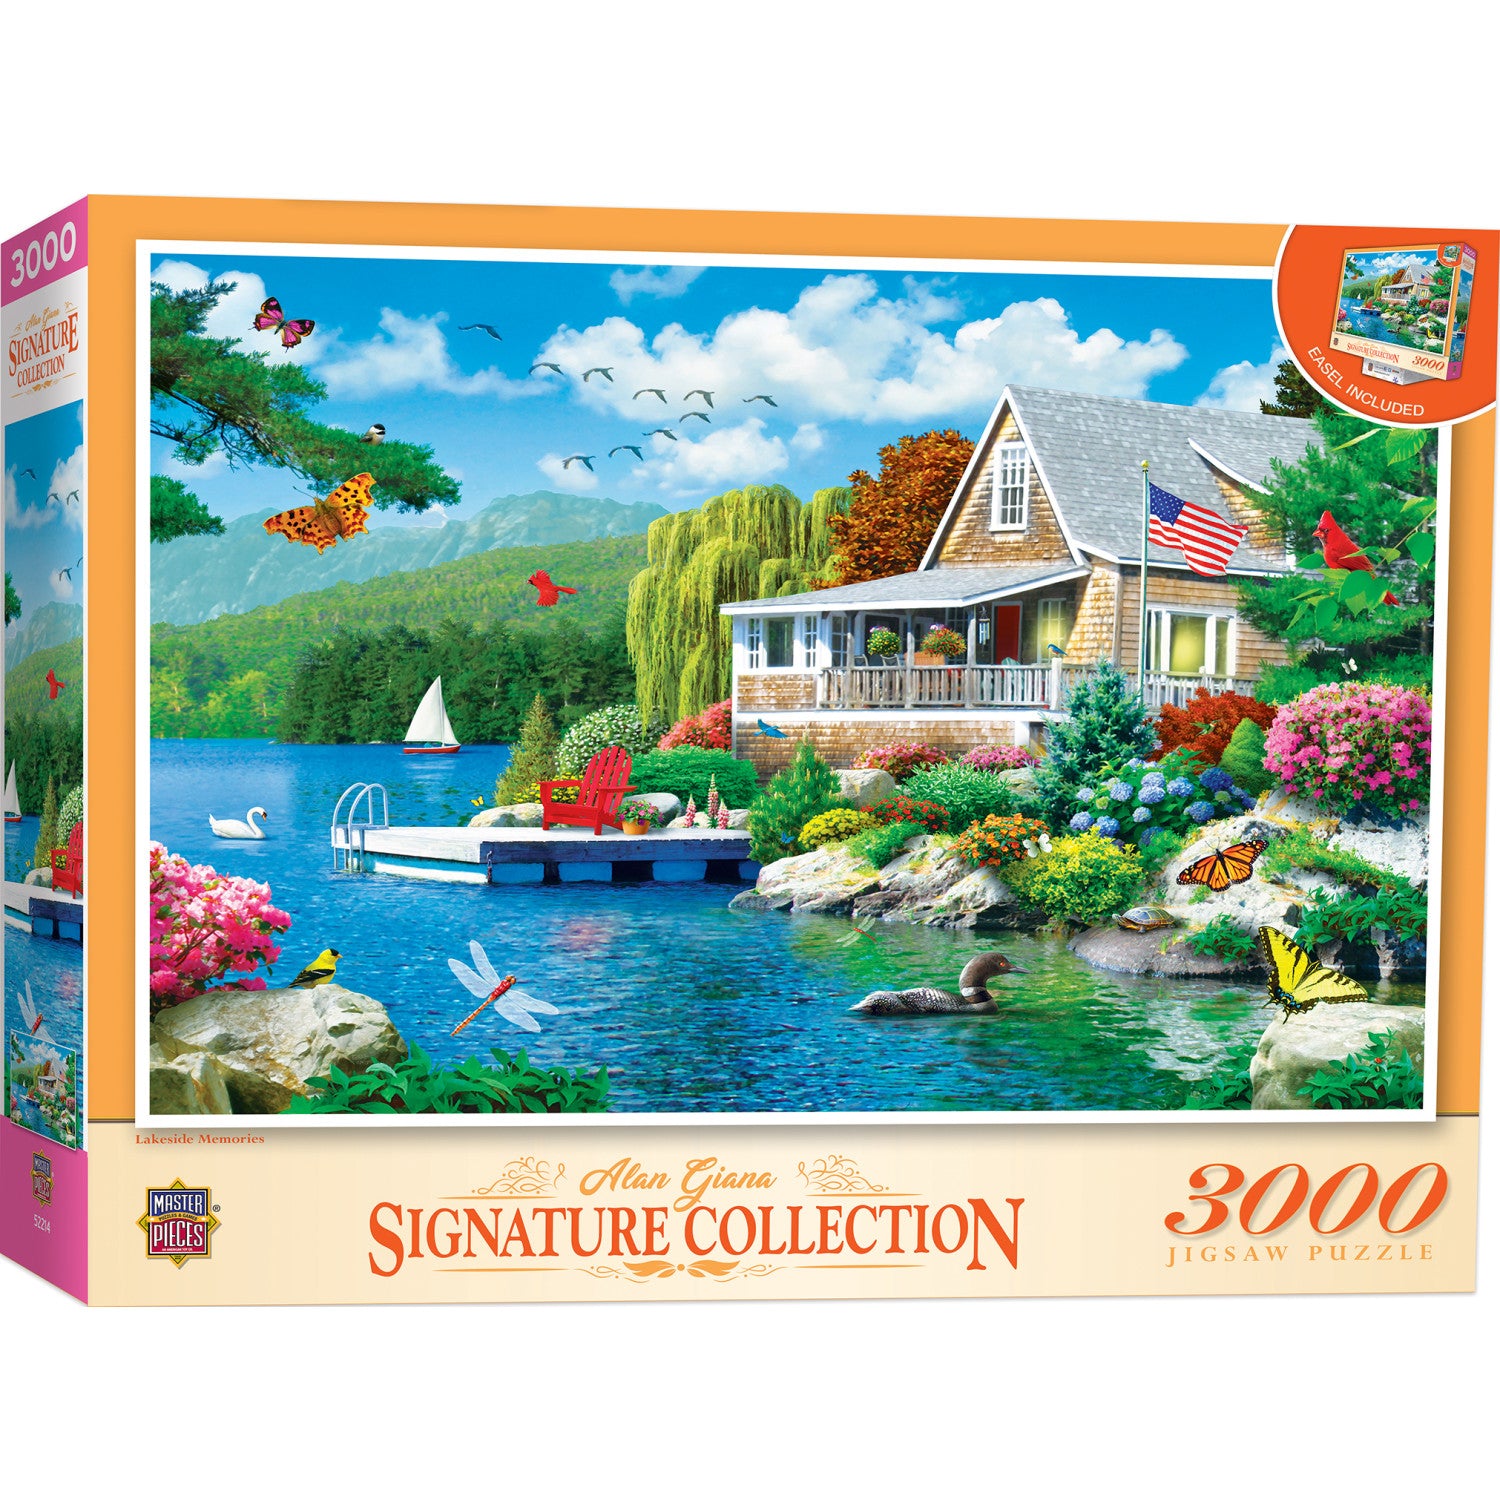 Signature - Lakeside Memories 3000 Piece Puzzle By Alan Giana